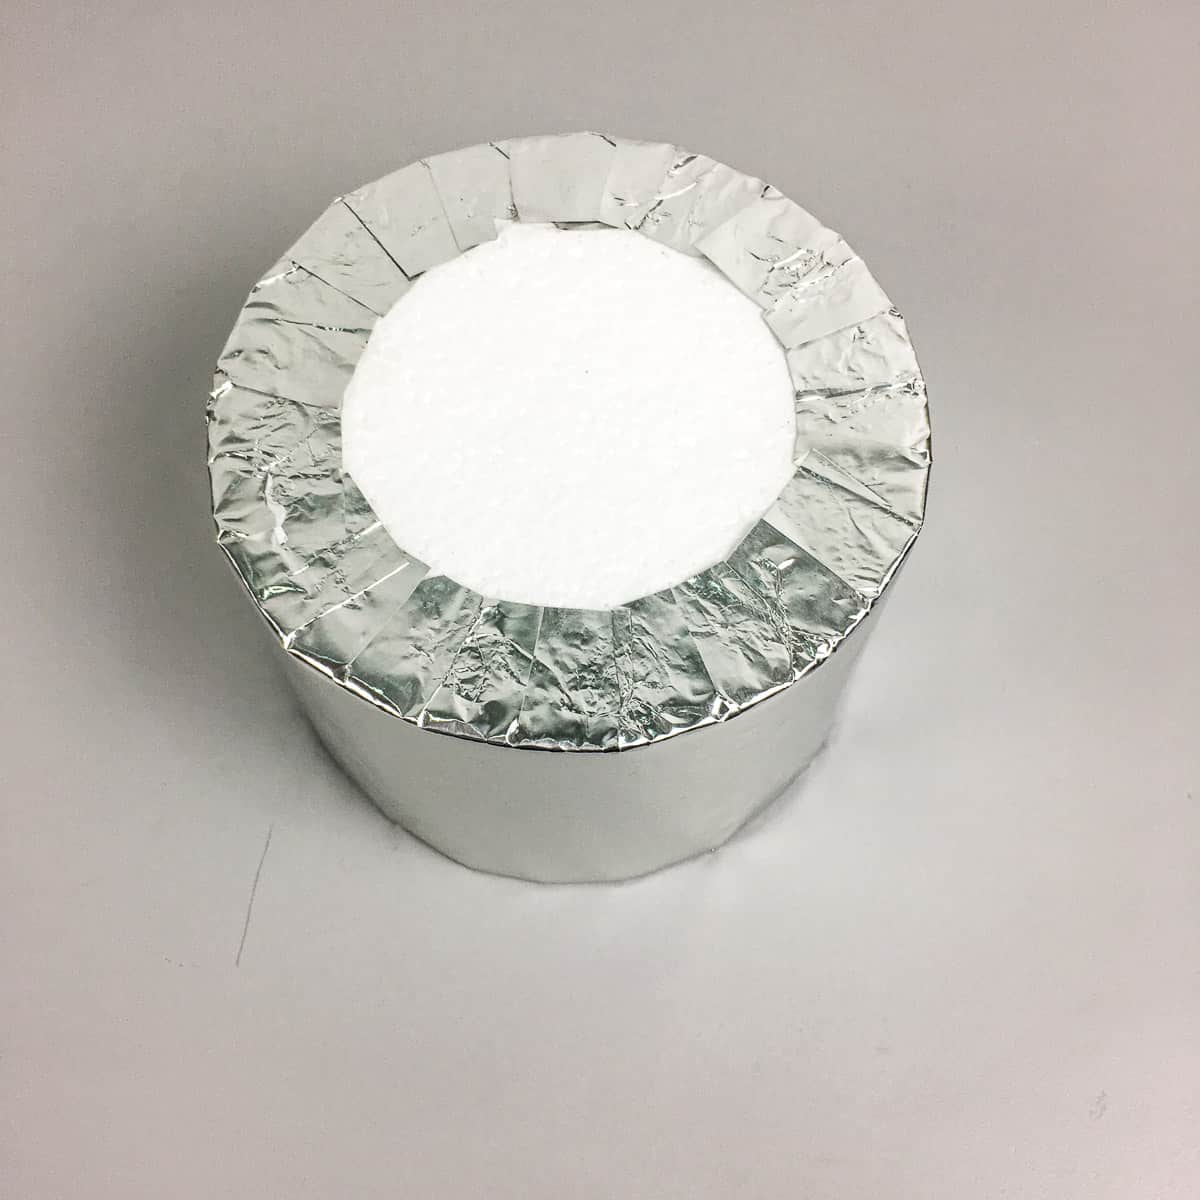 A round styrofoam block wrapped in silver paper.